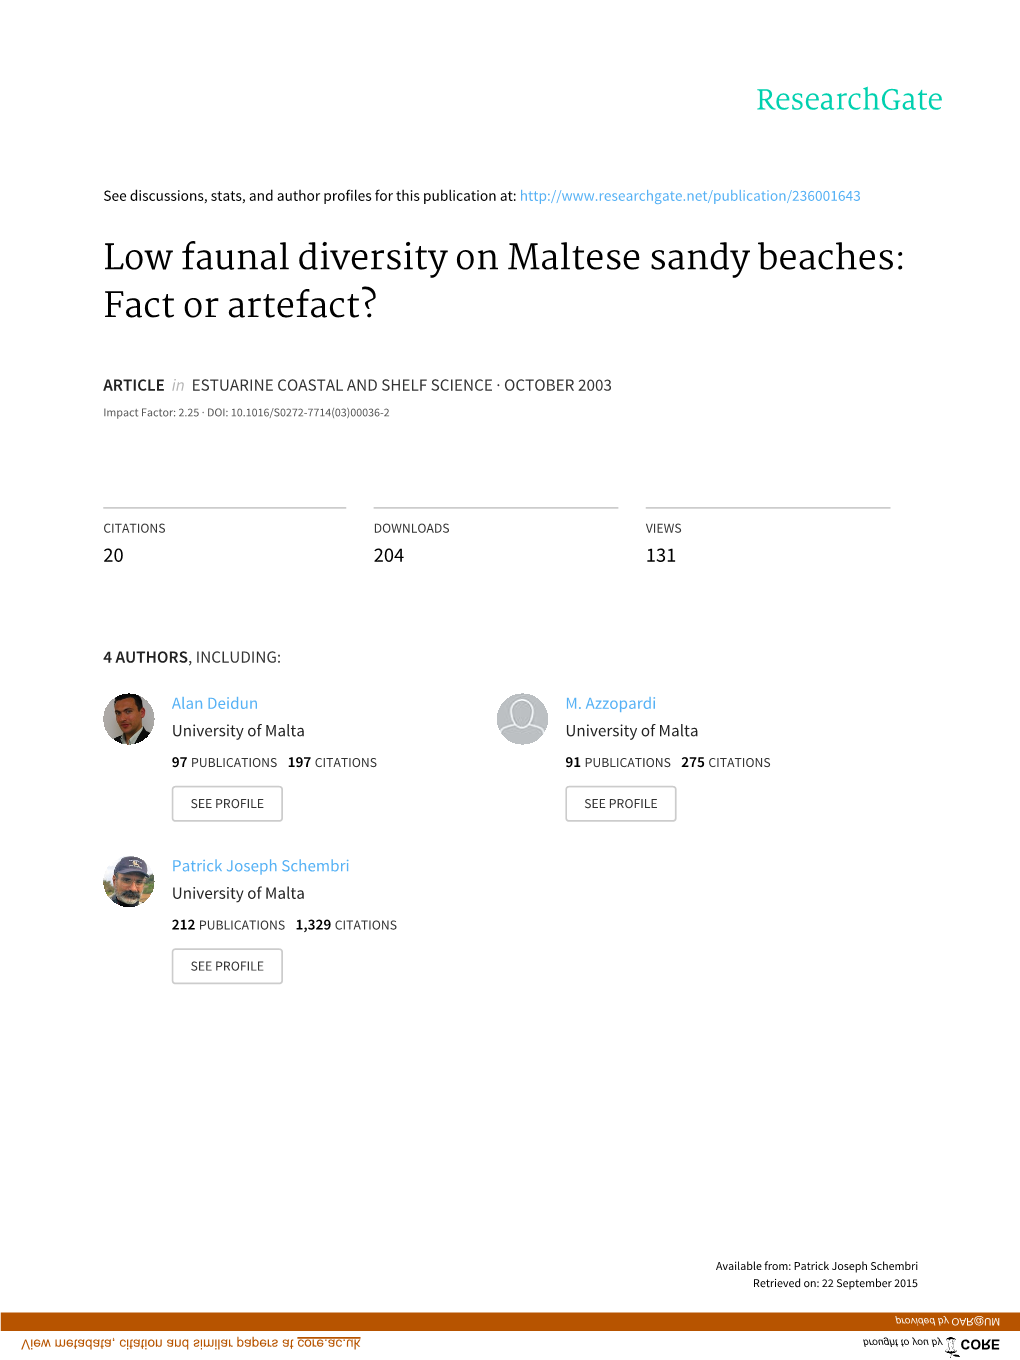 Low Faunal Diversity on Maltese Sandy Beaches: Fact Or Artefact?